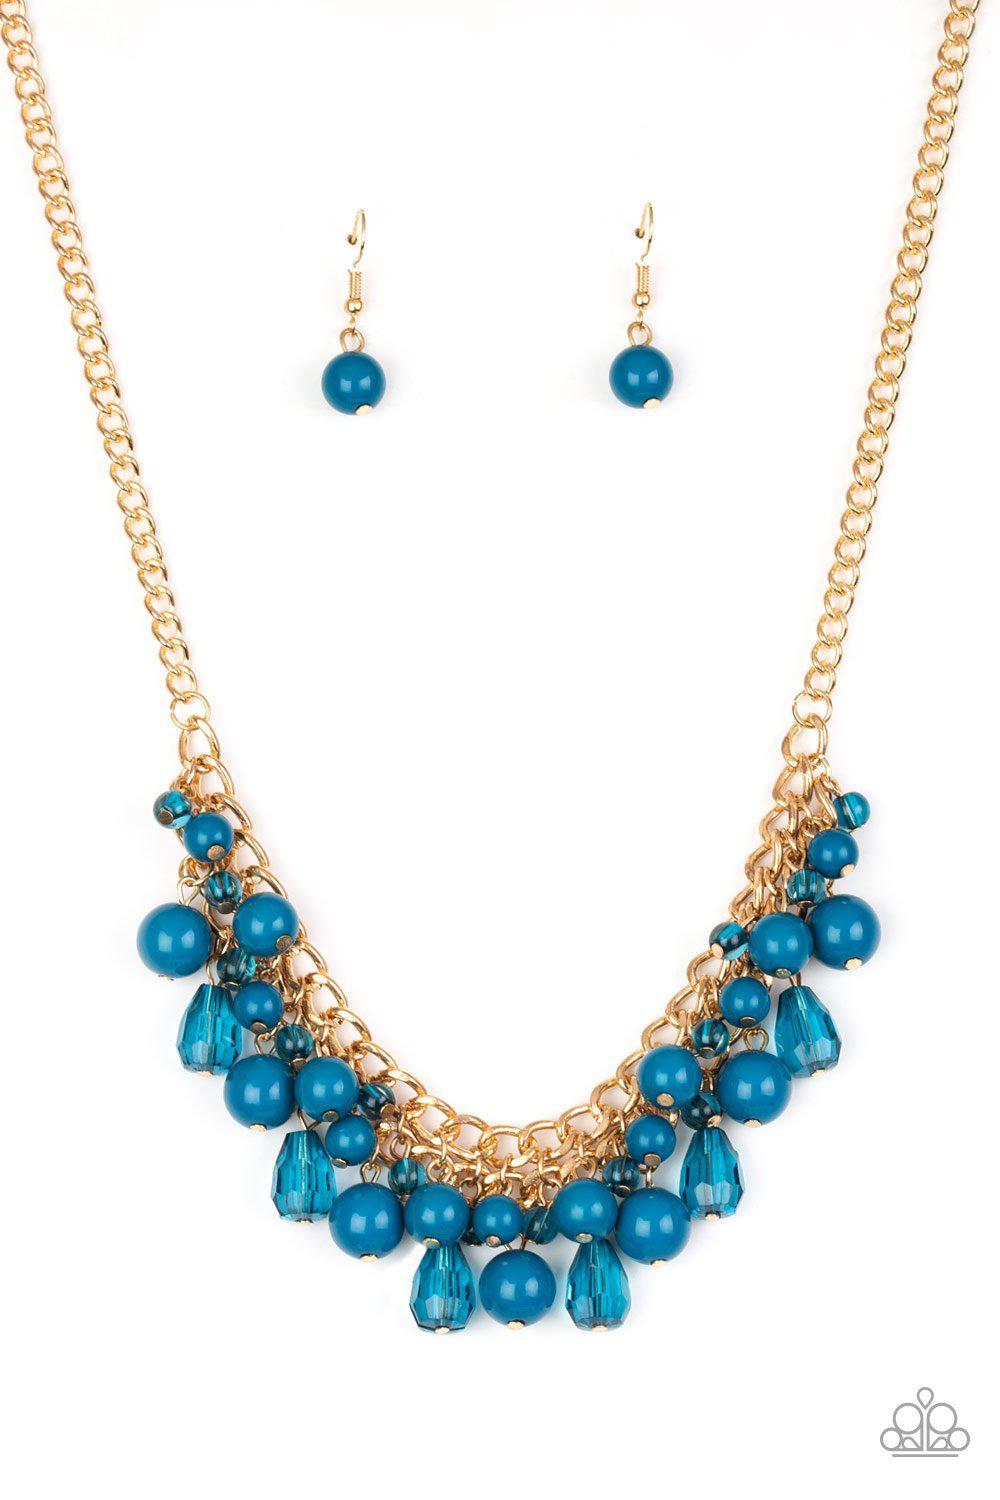 Tour de Trendsetter Blue and Gold Necklace - Paparazzi Accessories - lightbox -CarasShop.com - $5 Jewelry by Cara Jewels